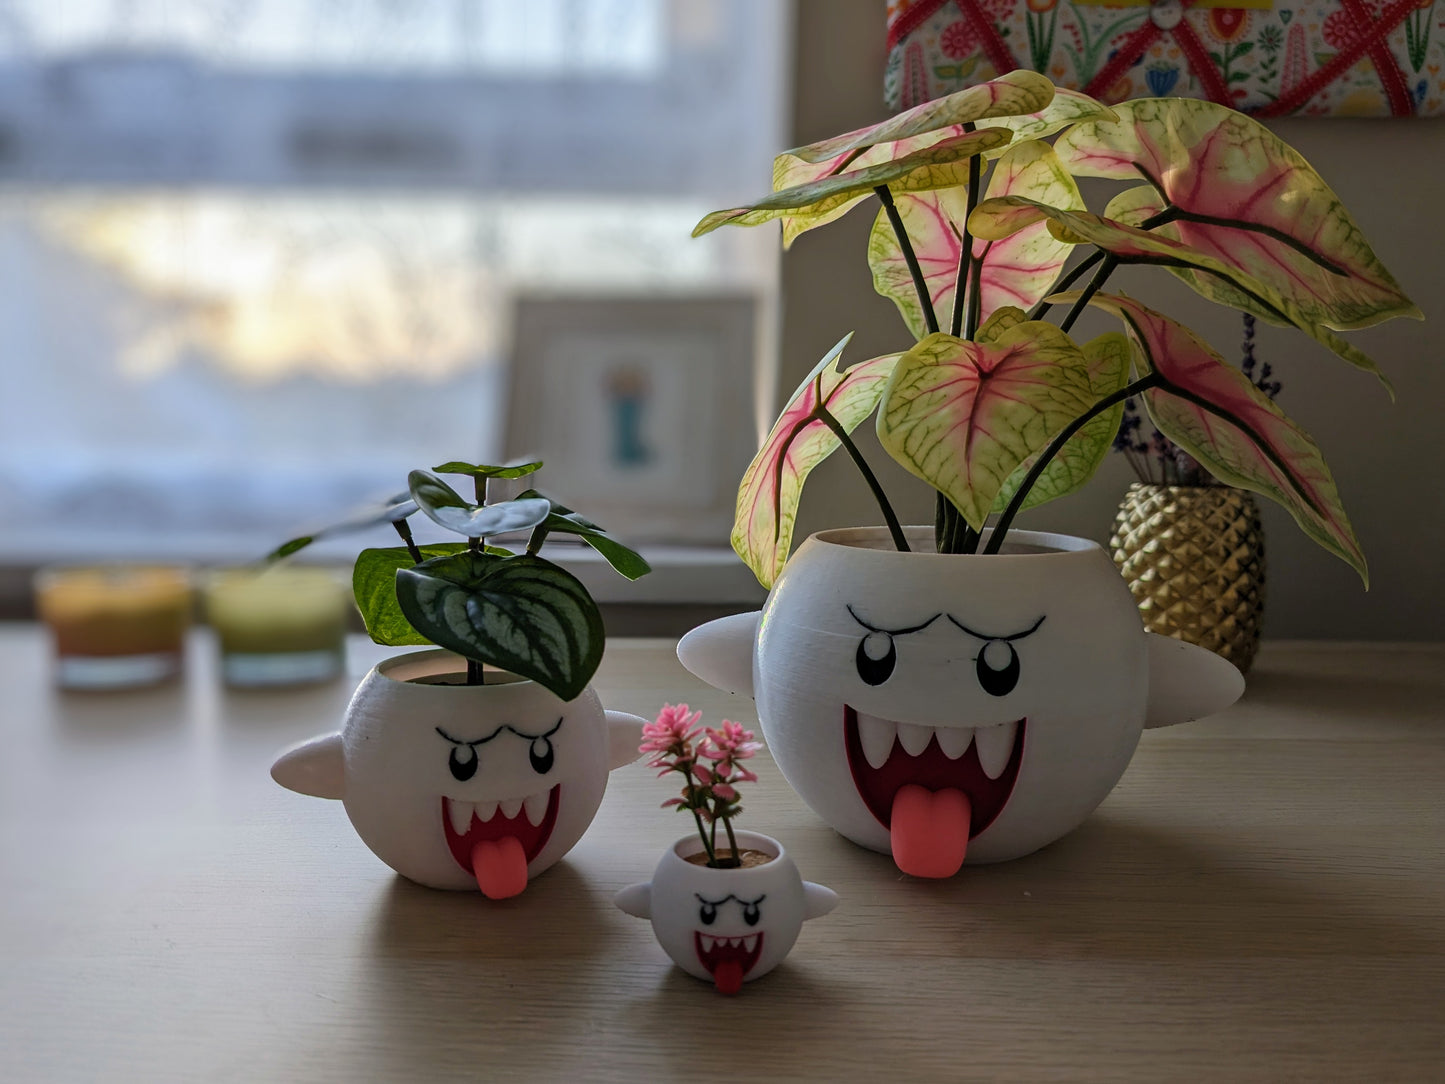 Mario Boo planters in various sizes on desk close up